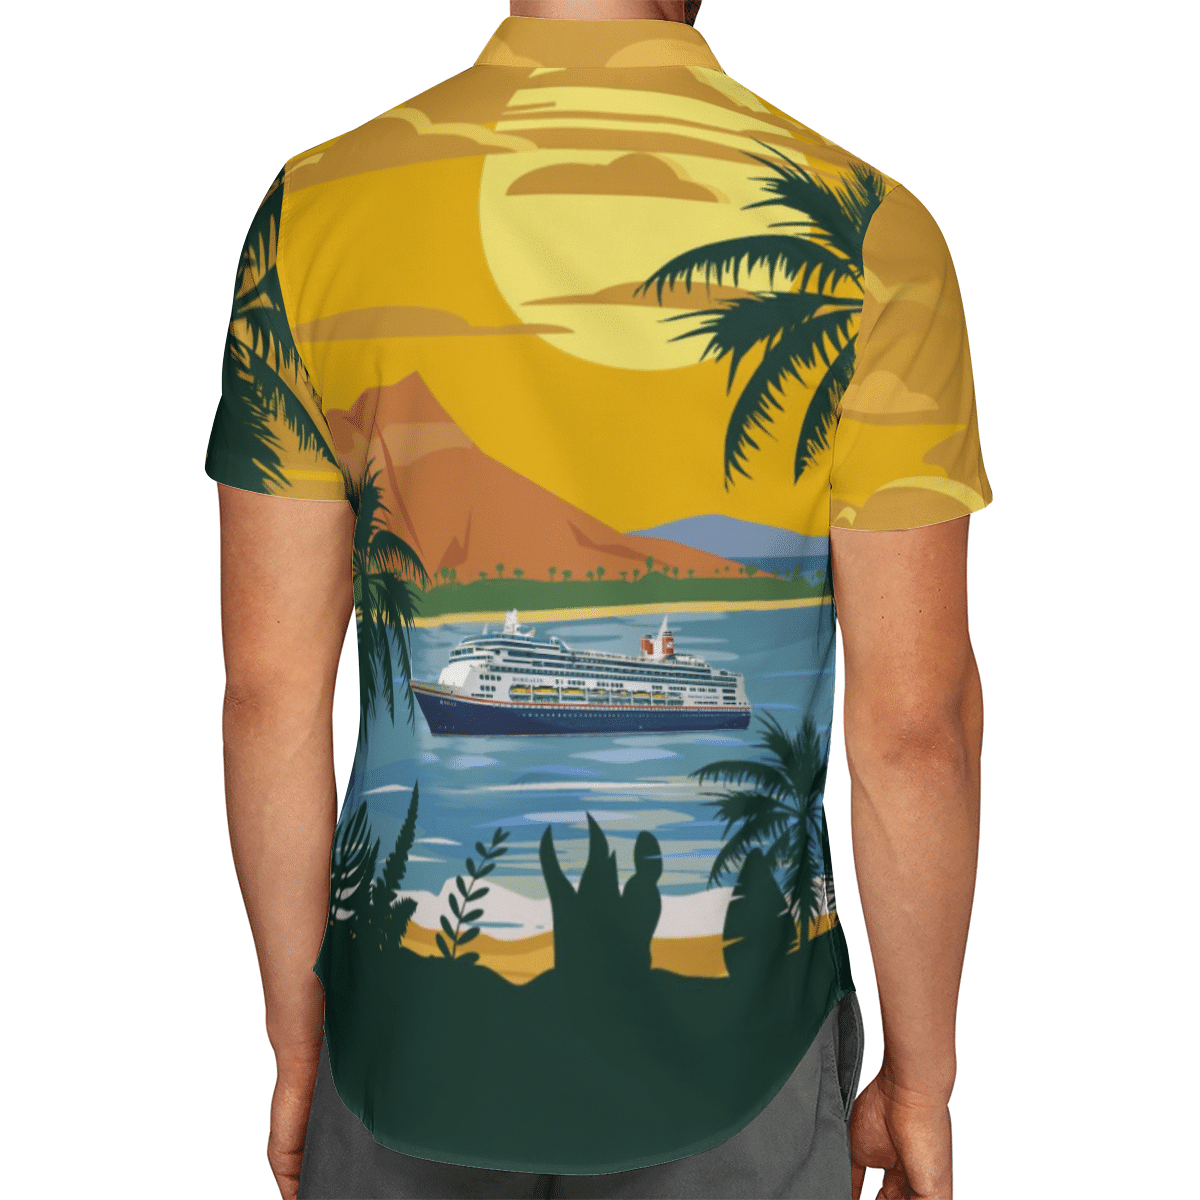 Going to the beach with a quality shirt 160